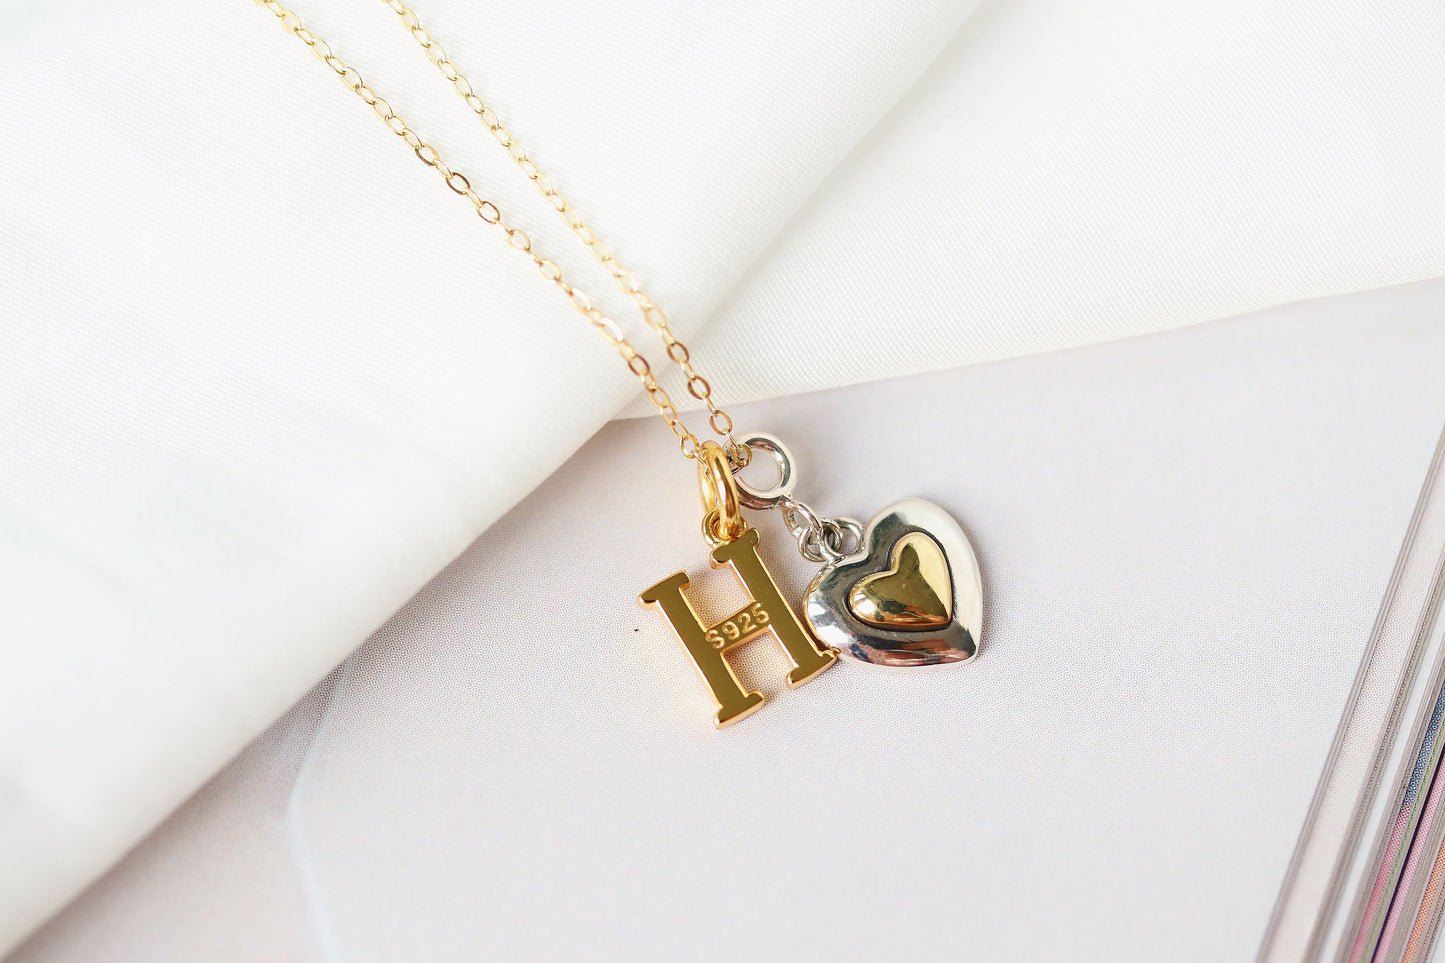 Initial Necklace for Sisters, Gold Vermeil Initial Personalised Necklace for Little Sister, Gold Heart Pearl Charm Necklace, Gift for Her